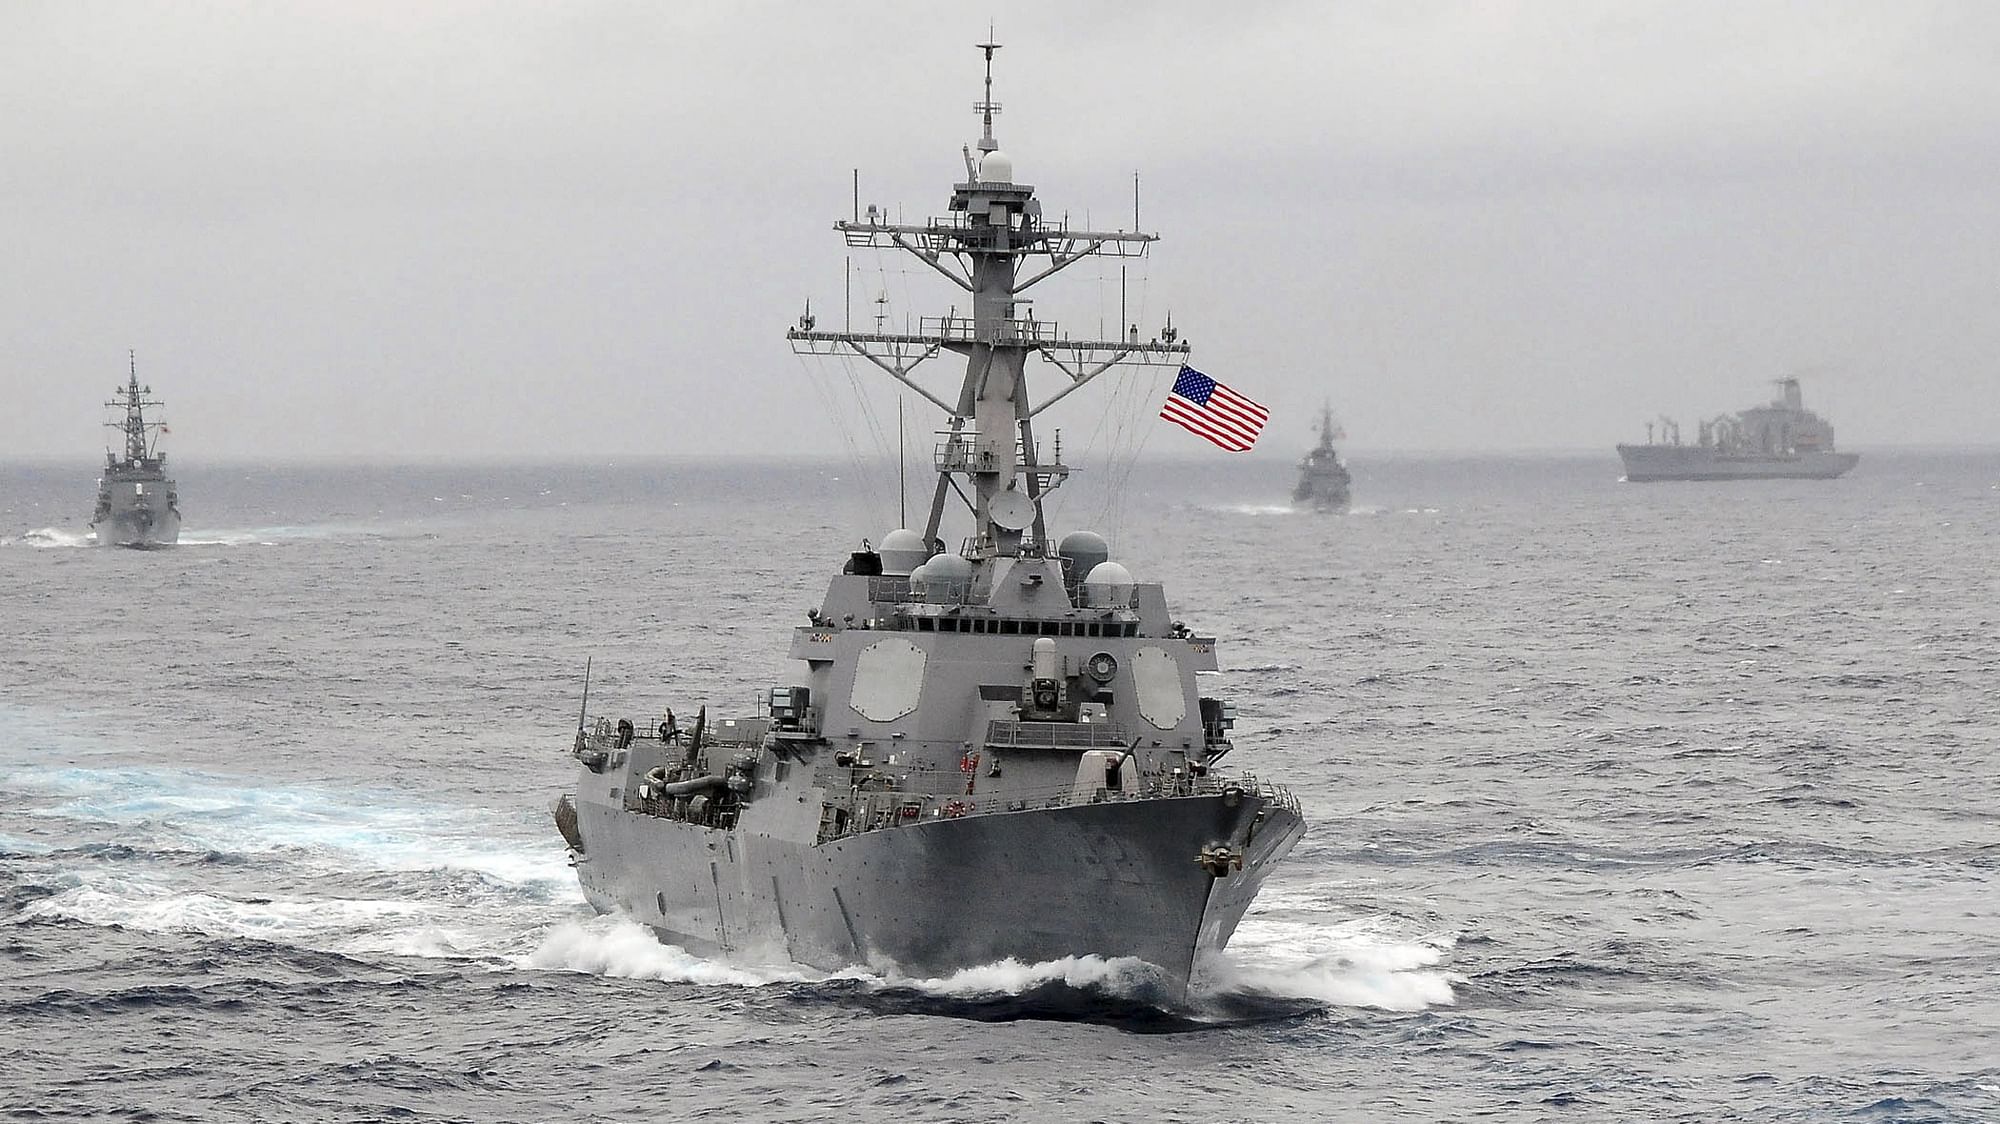 US Navy guided-missile destroyer USS Lassen sails in the Pacific Ocean in a November 2009 photo provided by the US Navy. (Photo: Reuters)